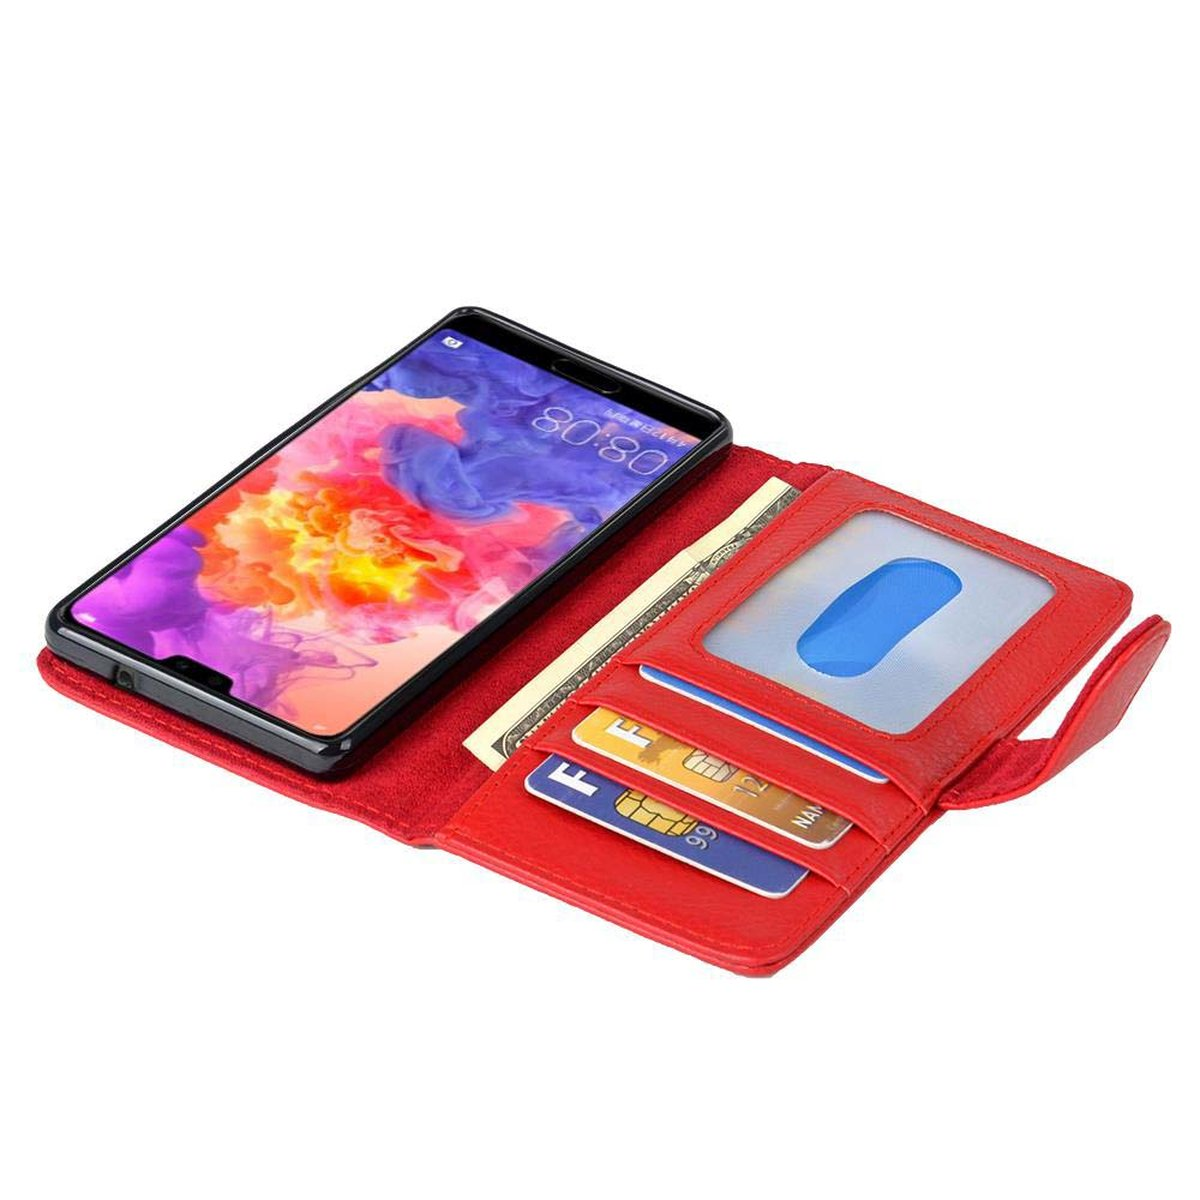 / Bookcover, CADORABO PLUS, ROT Standfunktuon, P20 Huawei, Hülle mit P20 Kartenfach INFERNO Book PRO